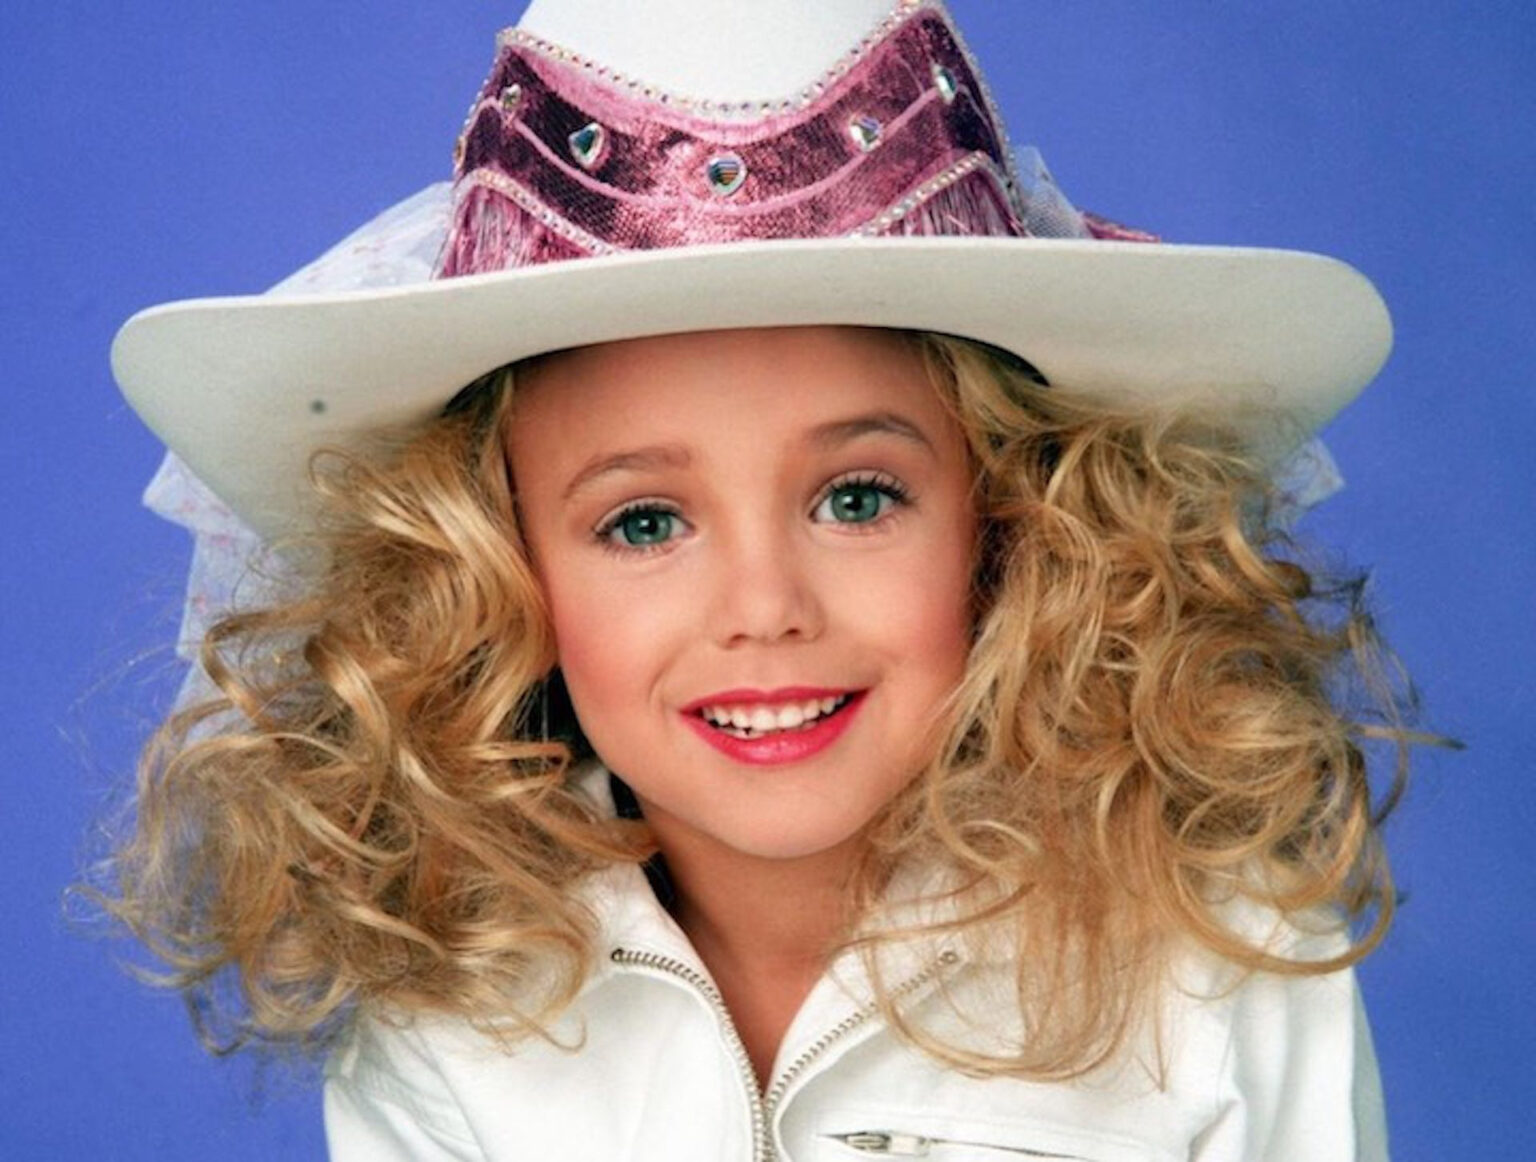 Will investigators ever solve this decades-old heinous true crime? Dive into these JonBenét Ramsey documentaries and tell us what you think!